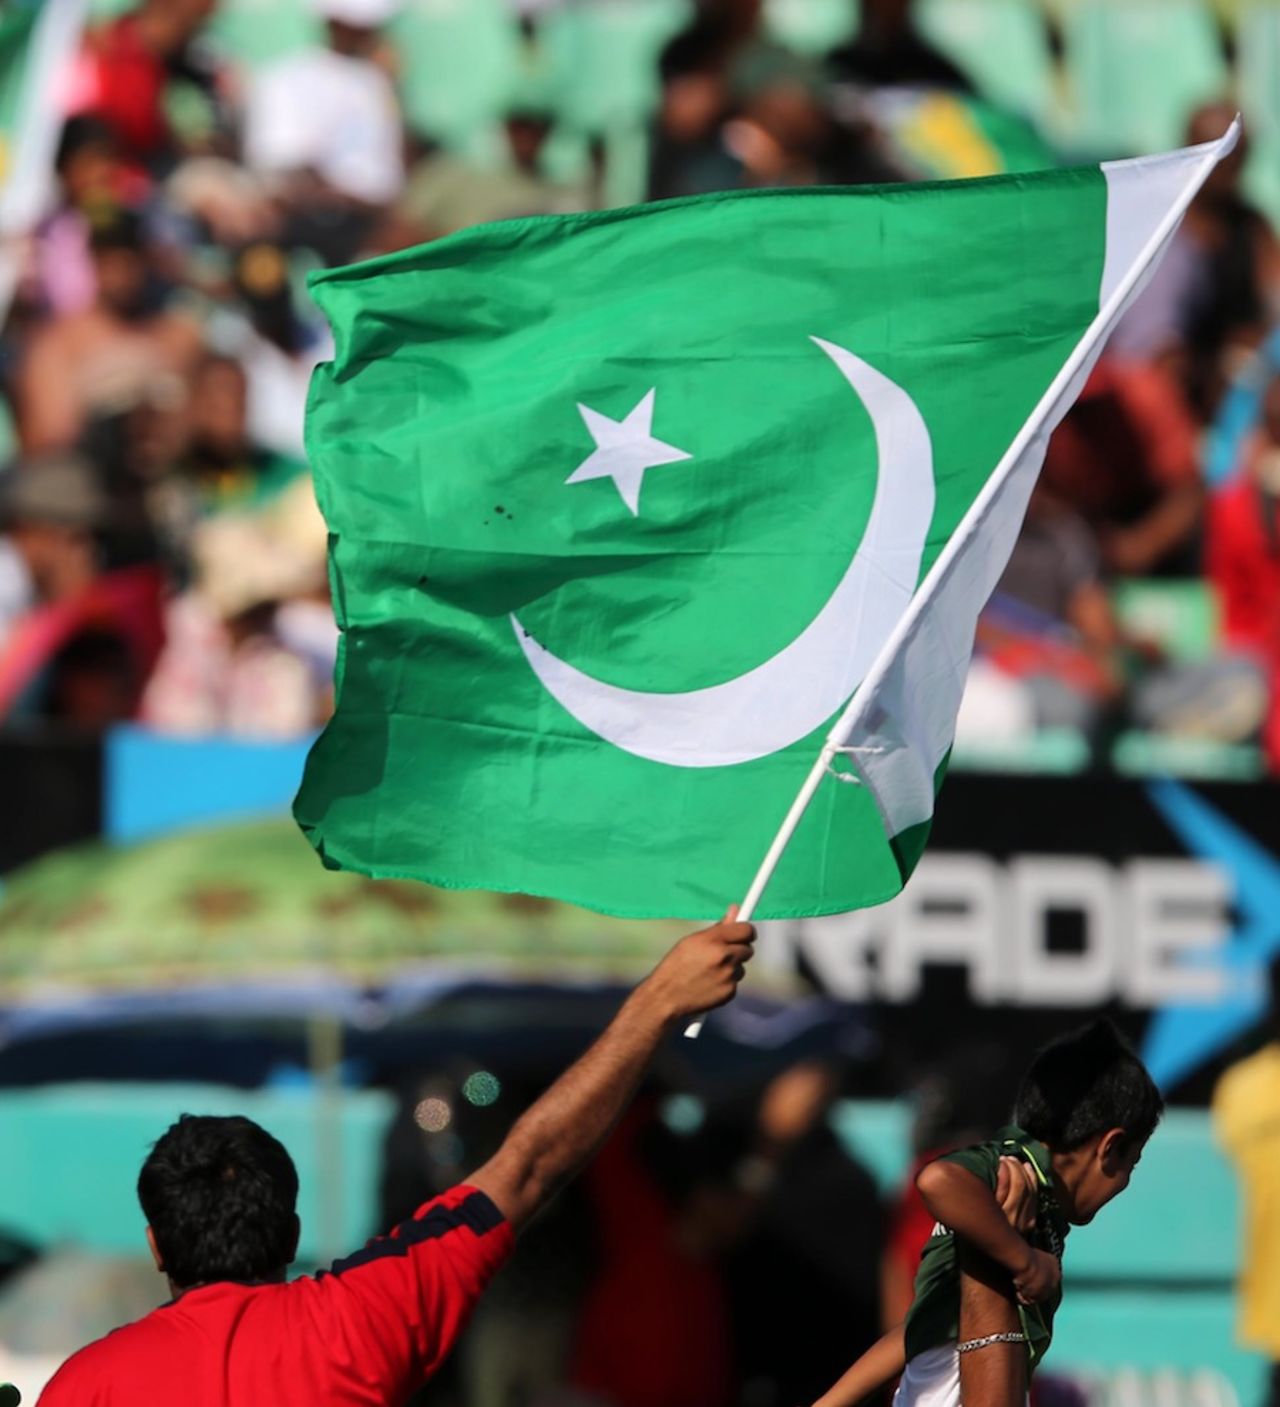 A Pakistan fan waves his flag at Kingsmead, South Africa v Pakistan, 4th ODI, Durban, March 21, 2013